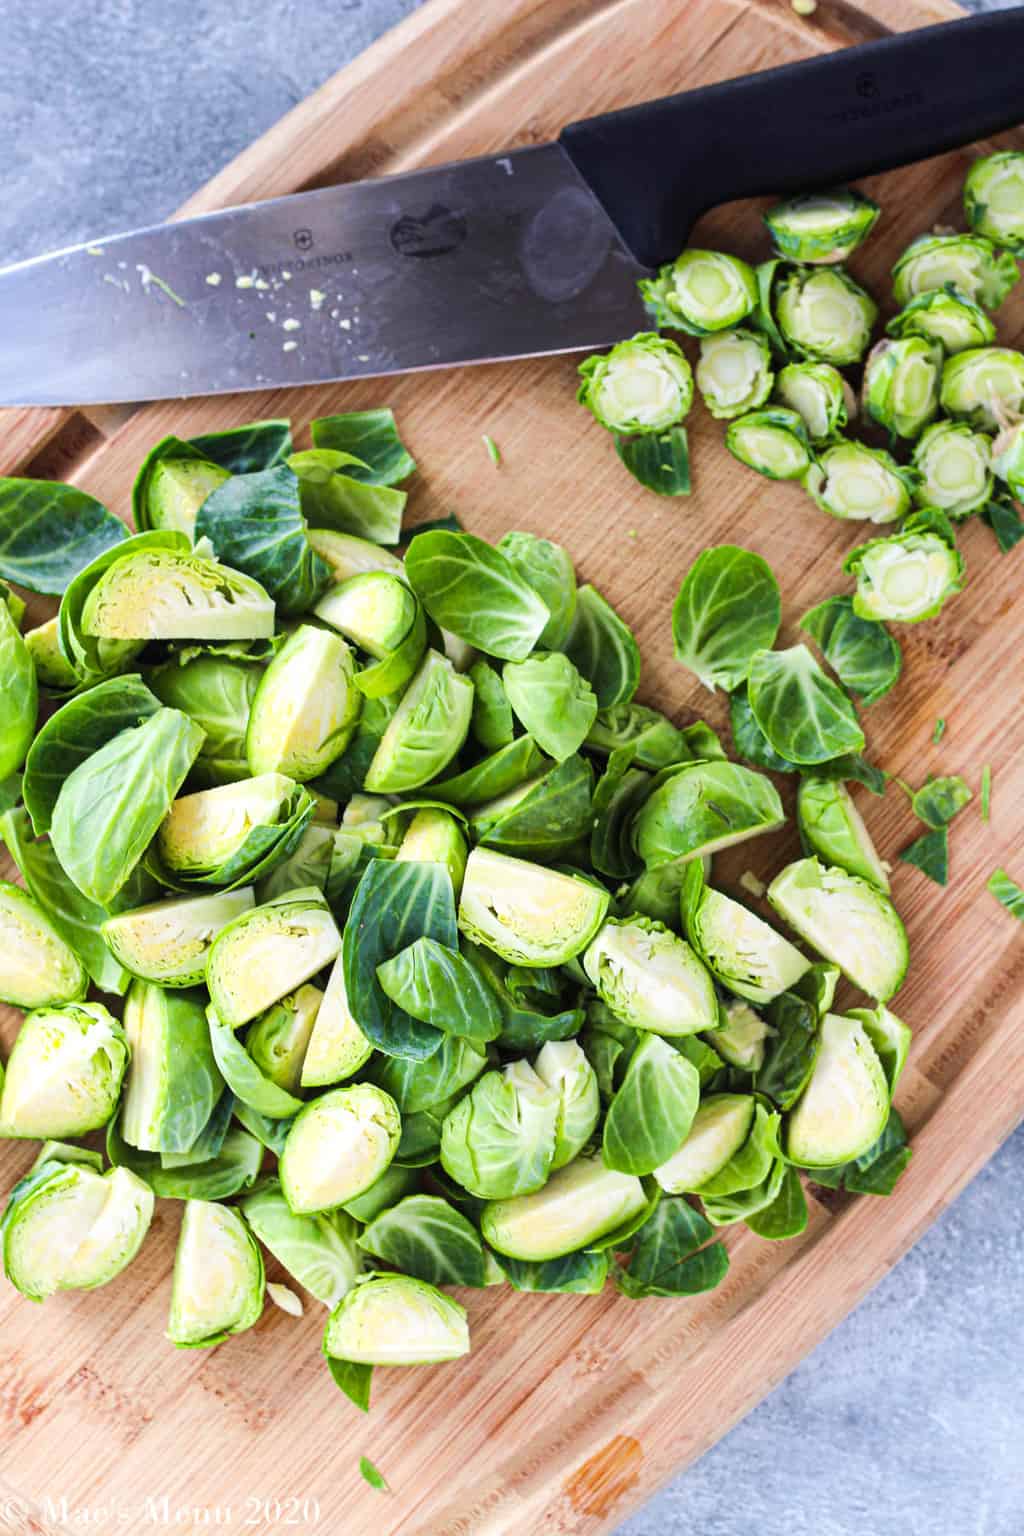 an overhead shot of a wooden cutting board of brussels sprouts with the ends trimmed off and the sprouts halved and quartered